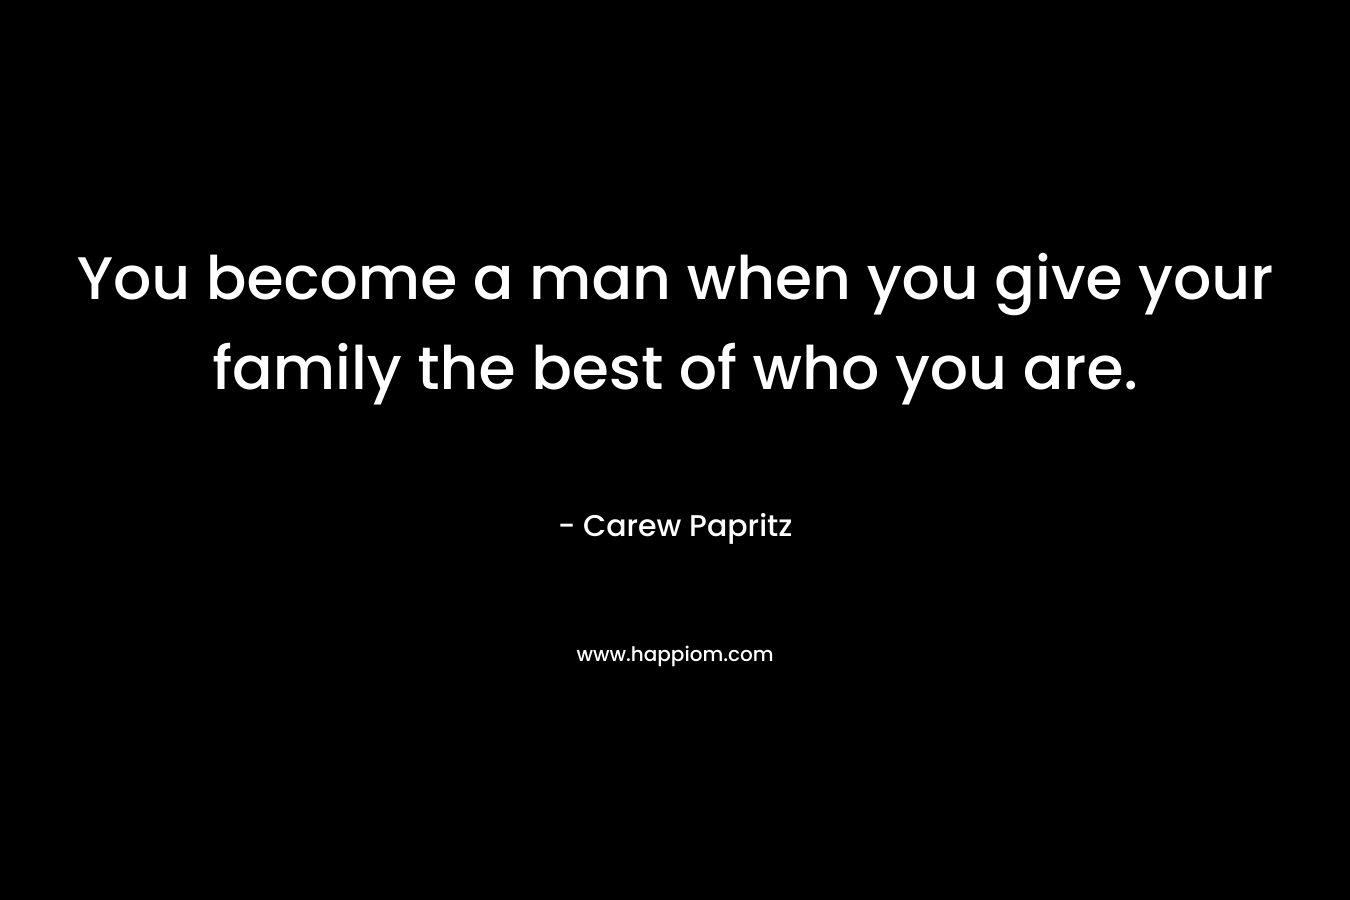 You become a man when you give your family the best of who you are.